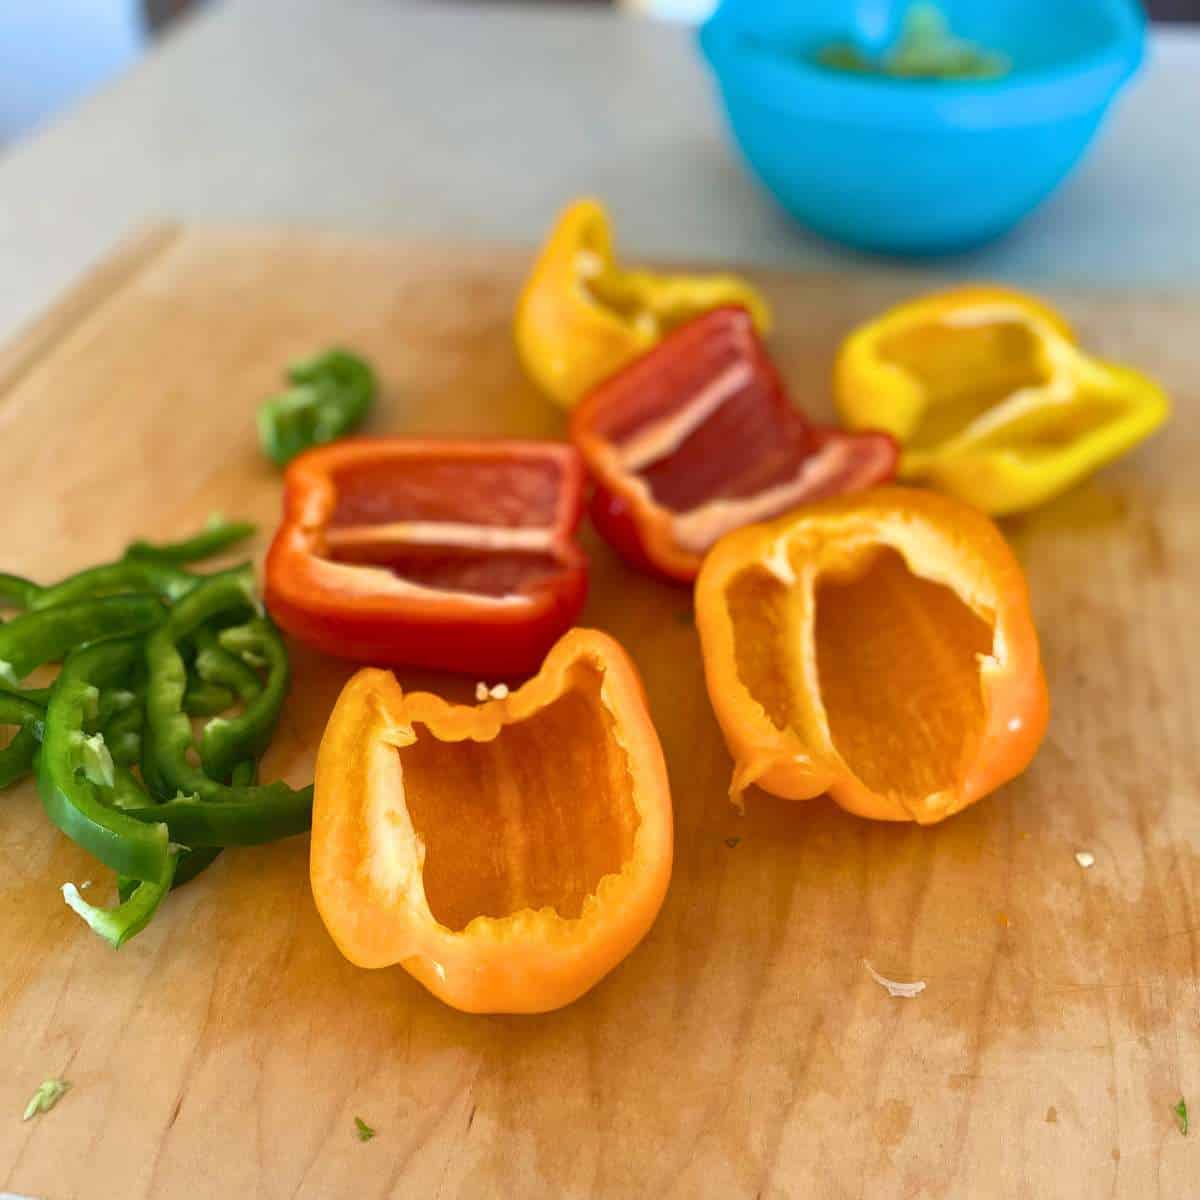 Orange, red, and yellow bell peppers cut in half lengthwise and green peppers in slices.